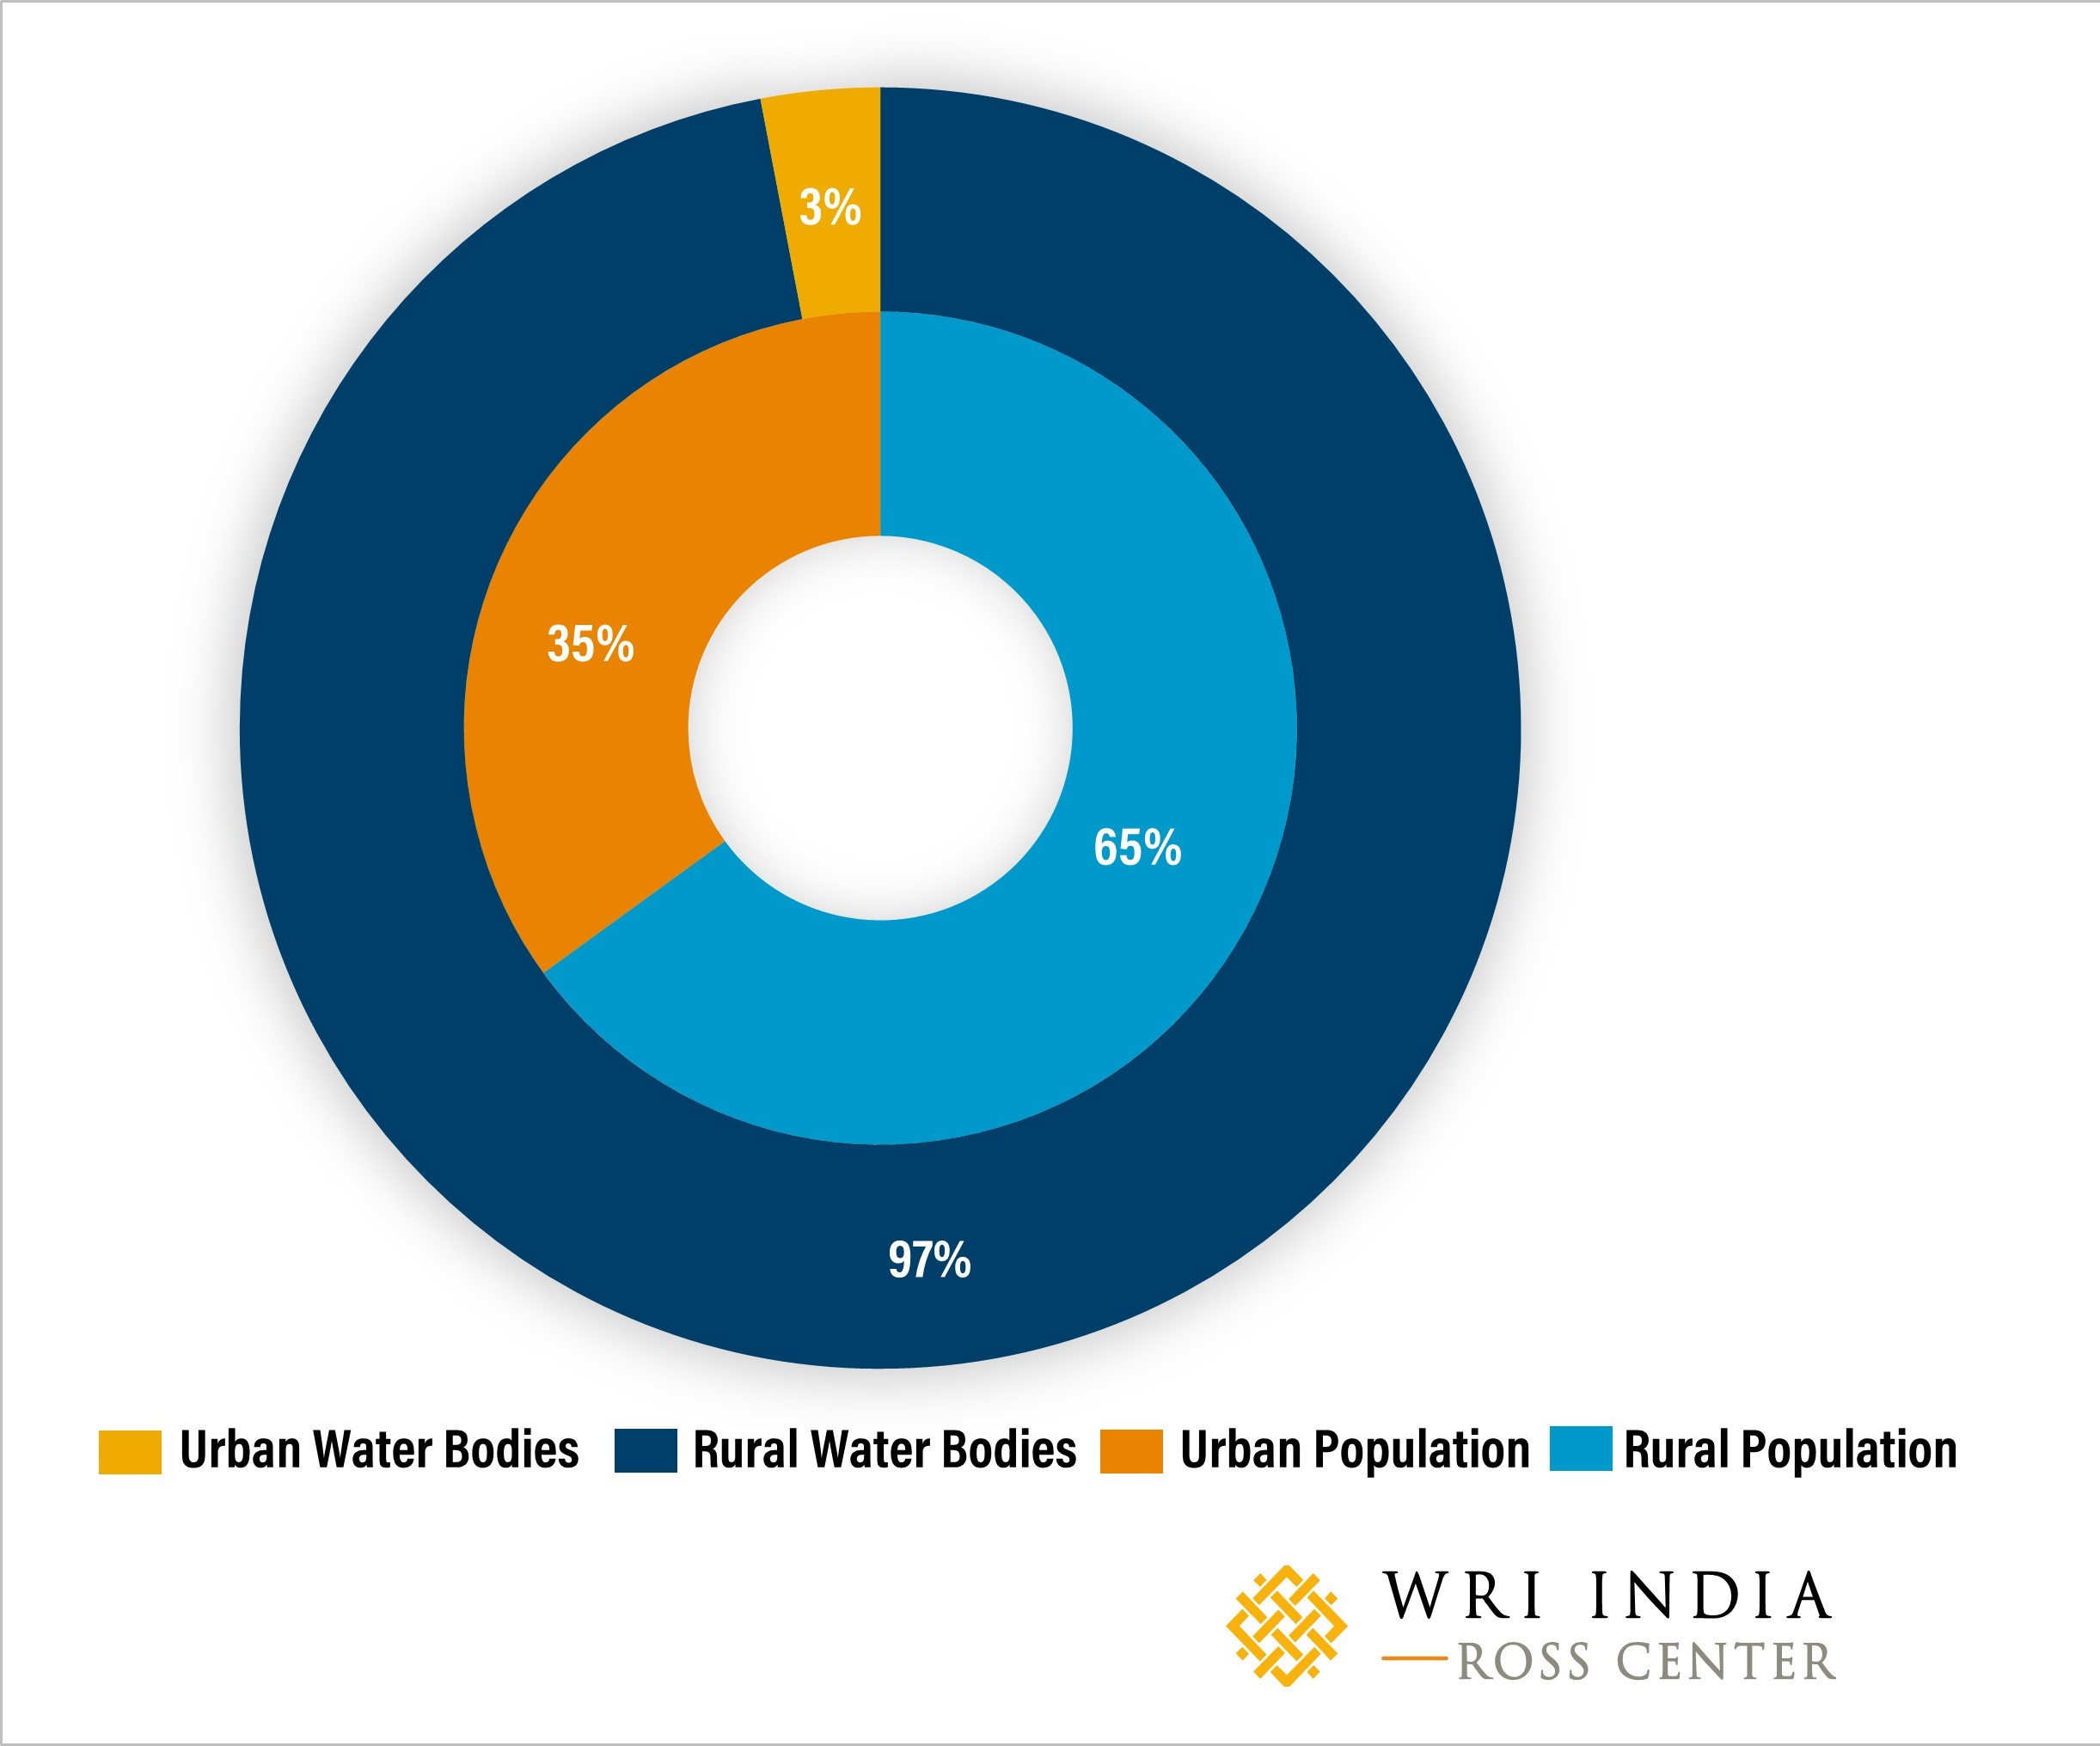 Figure 1 Distribution of Water Bodies Across Rural and Urban Areas of India